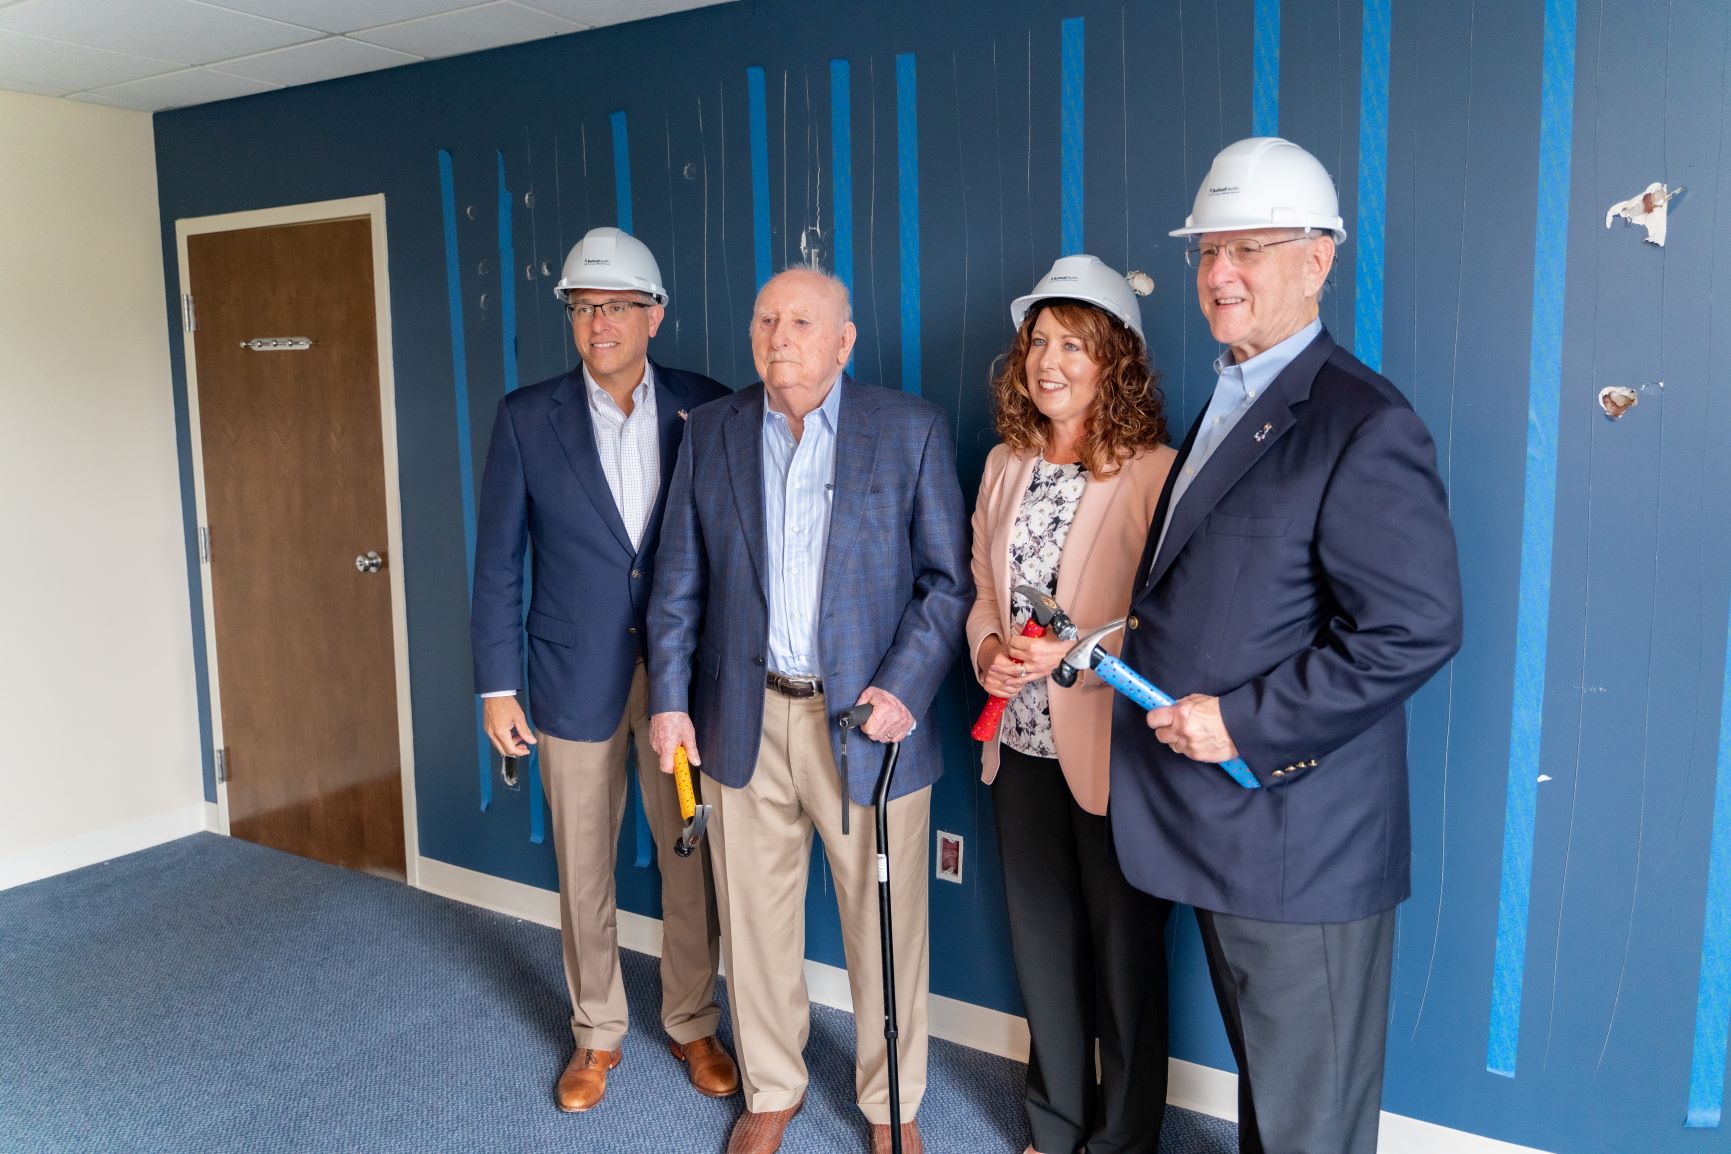 J.D. Nicewonder, Alan Levine, Lisa Carter and Scott Niswonger pose for photo with hammers to mark first phase of construction